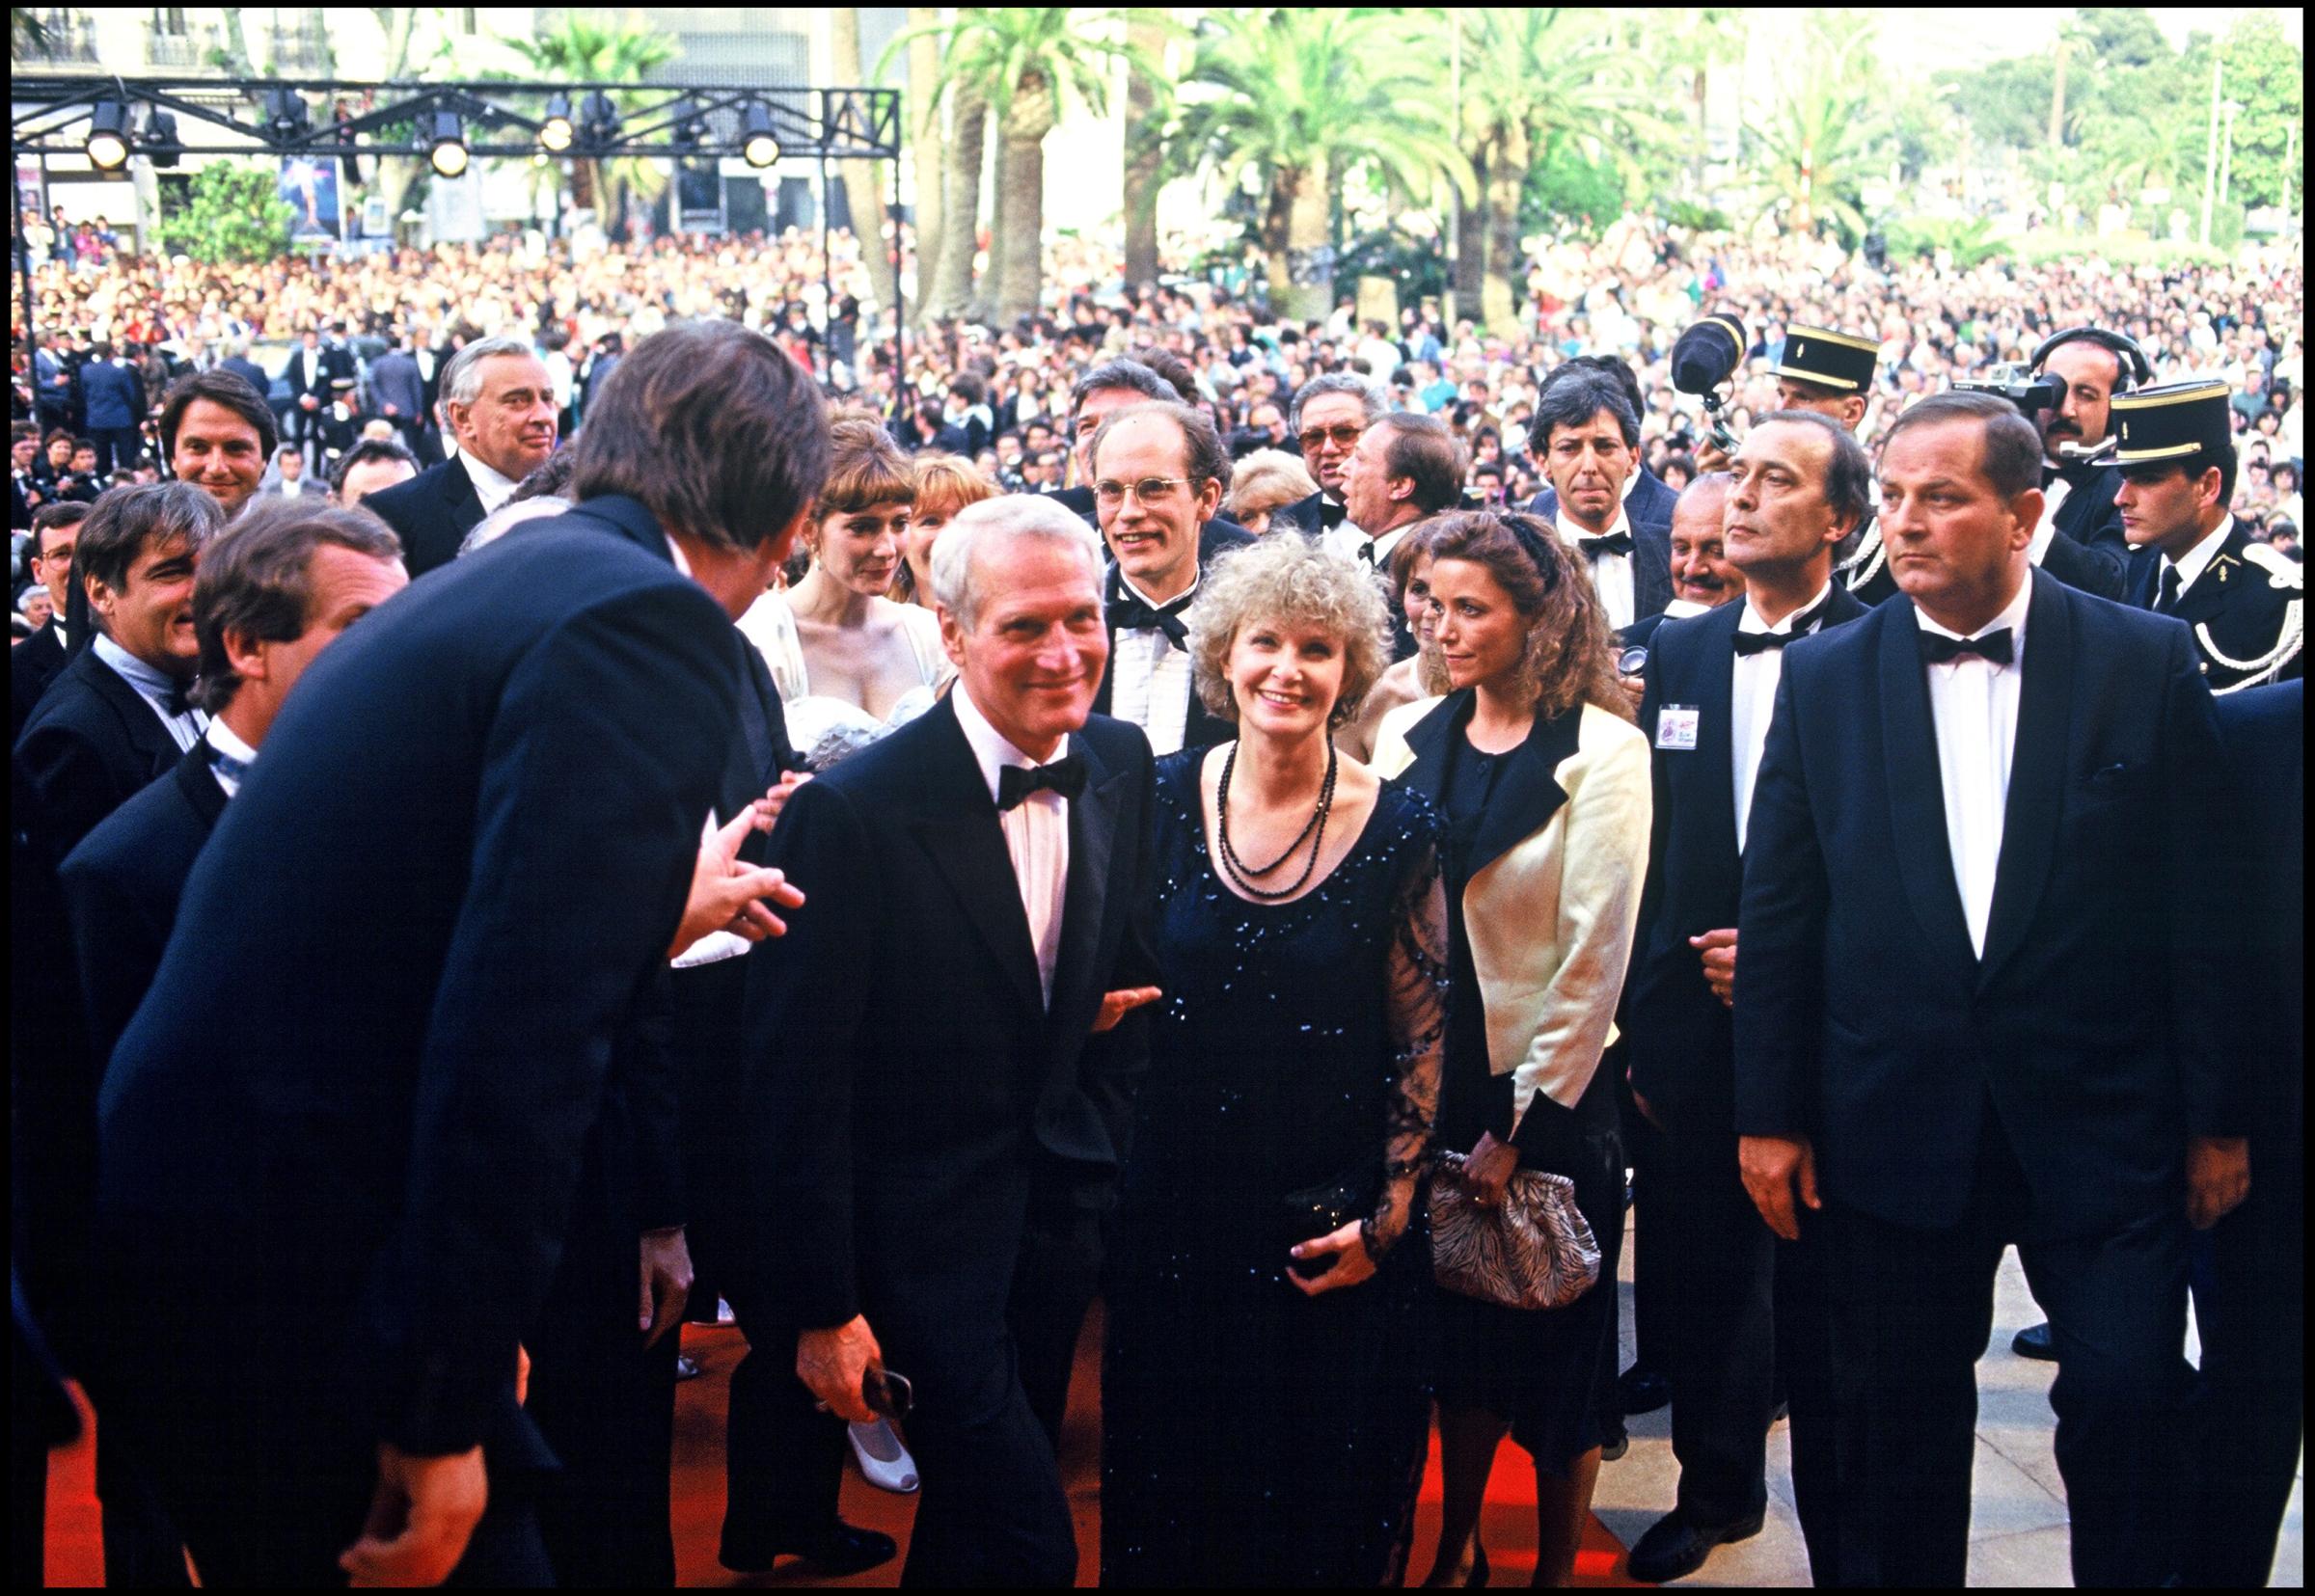 Paul Newman and Joanne Woodward at the 1987 International Cannes Film Festival